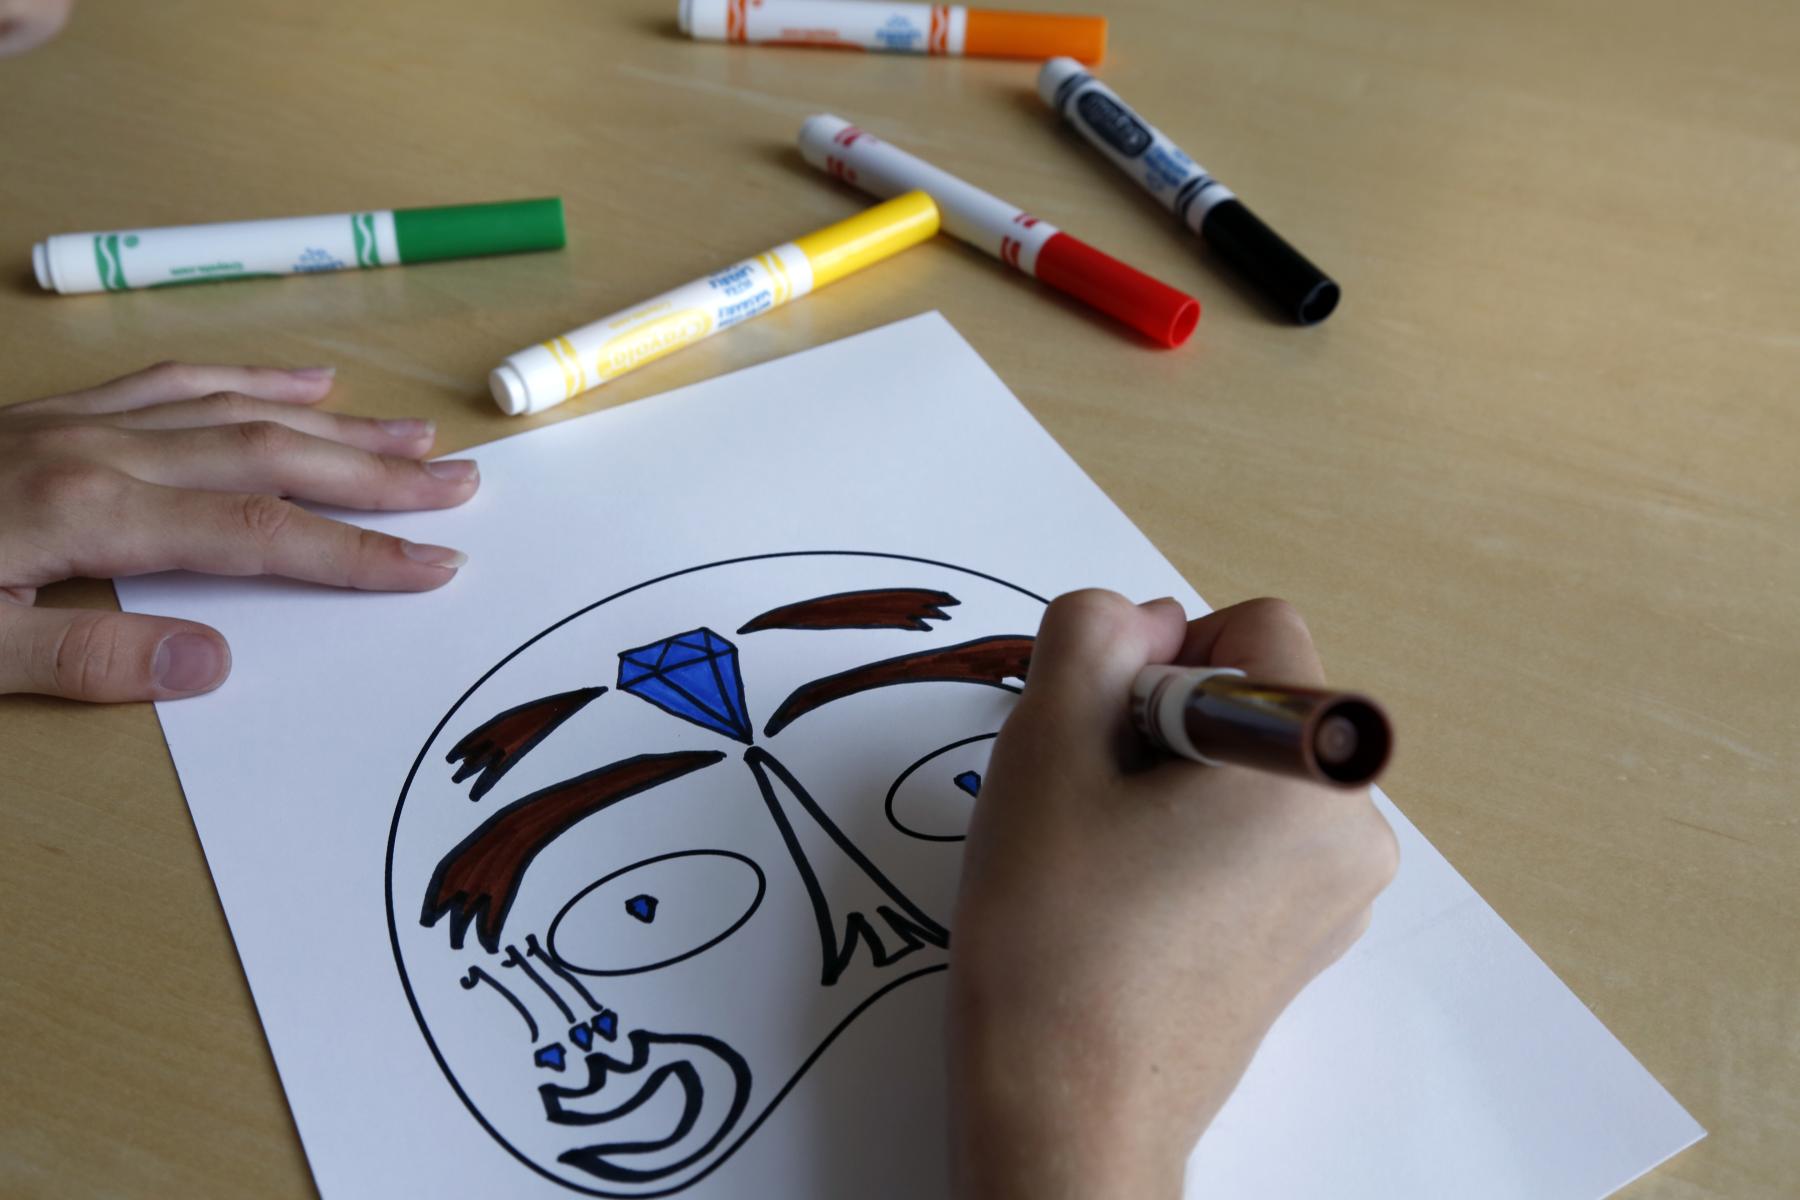 coloring a mask on a table with markers